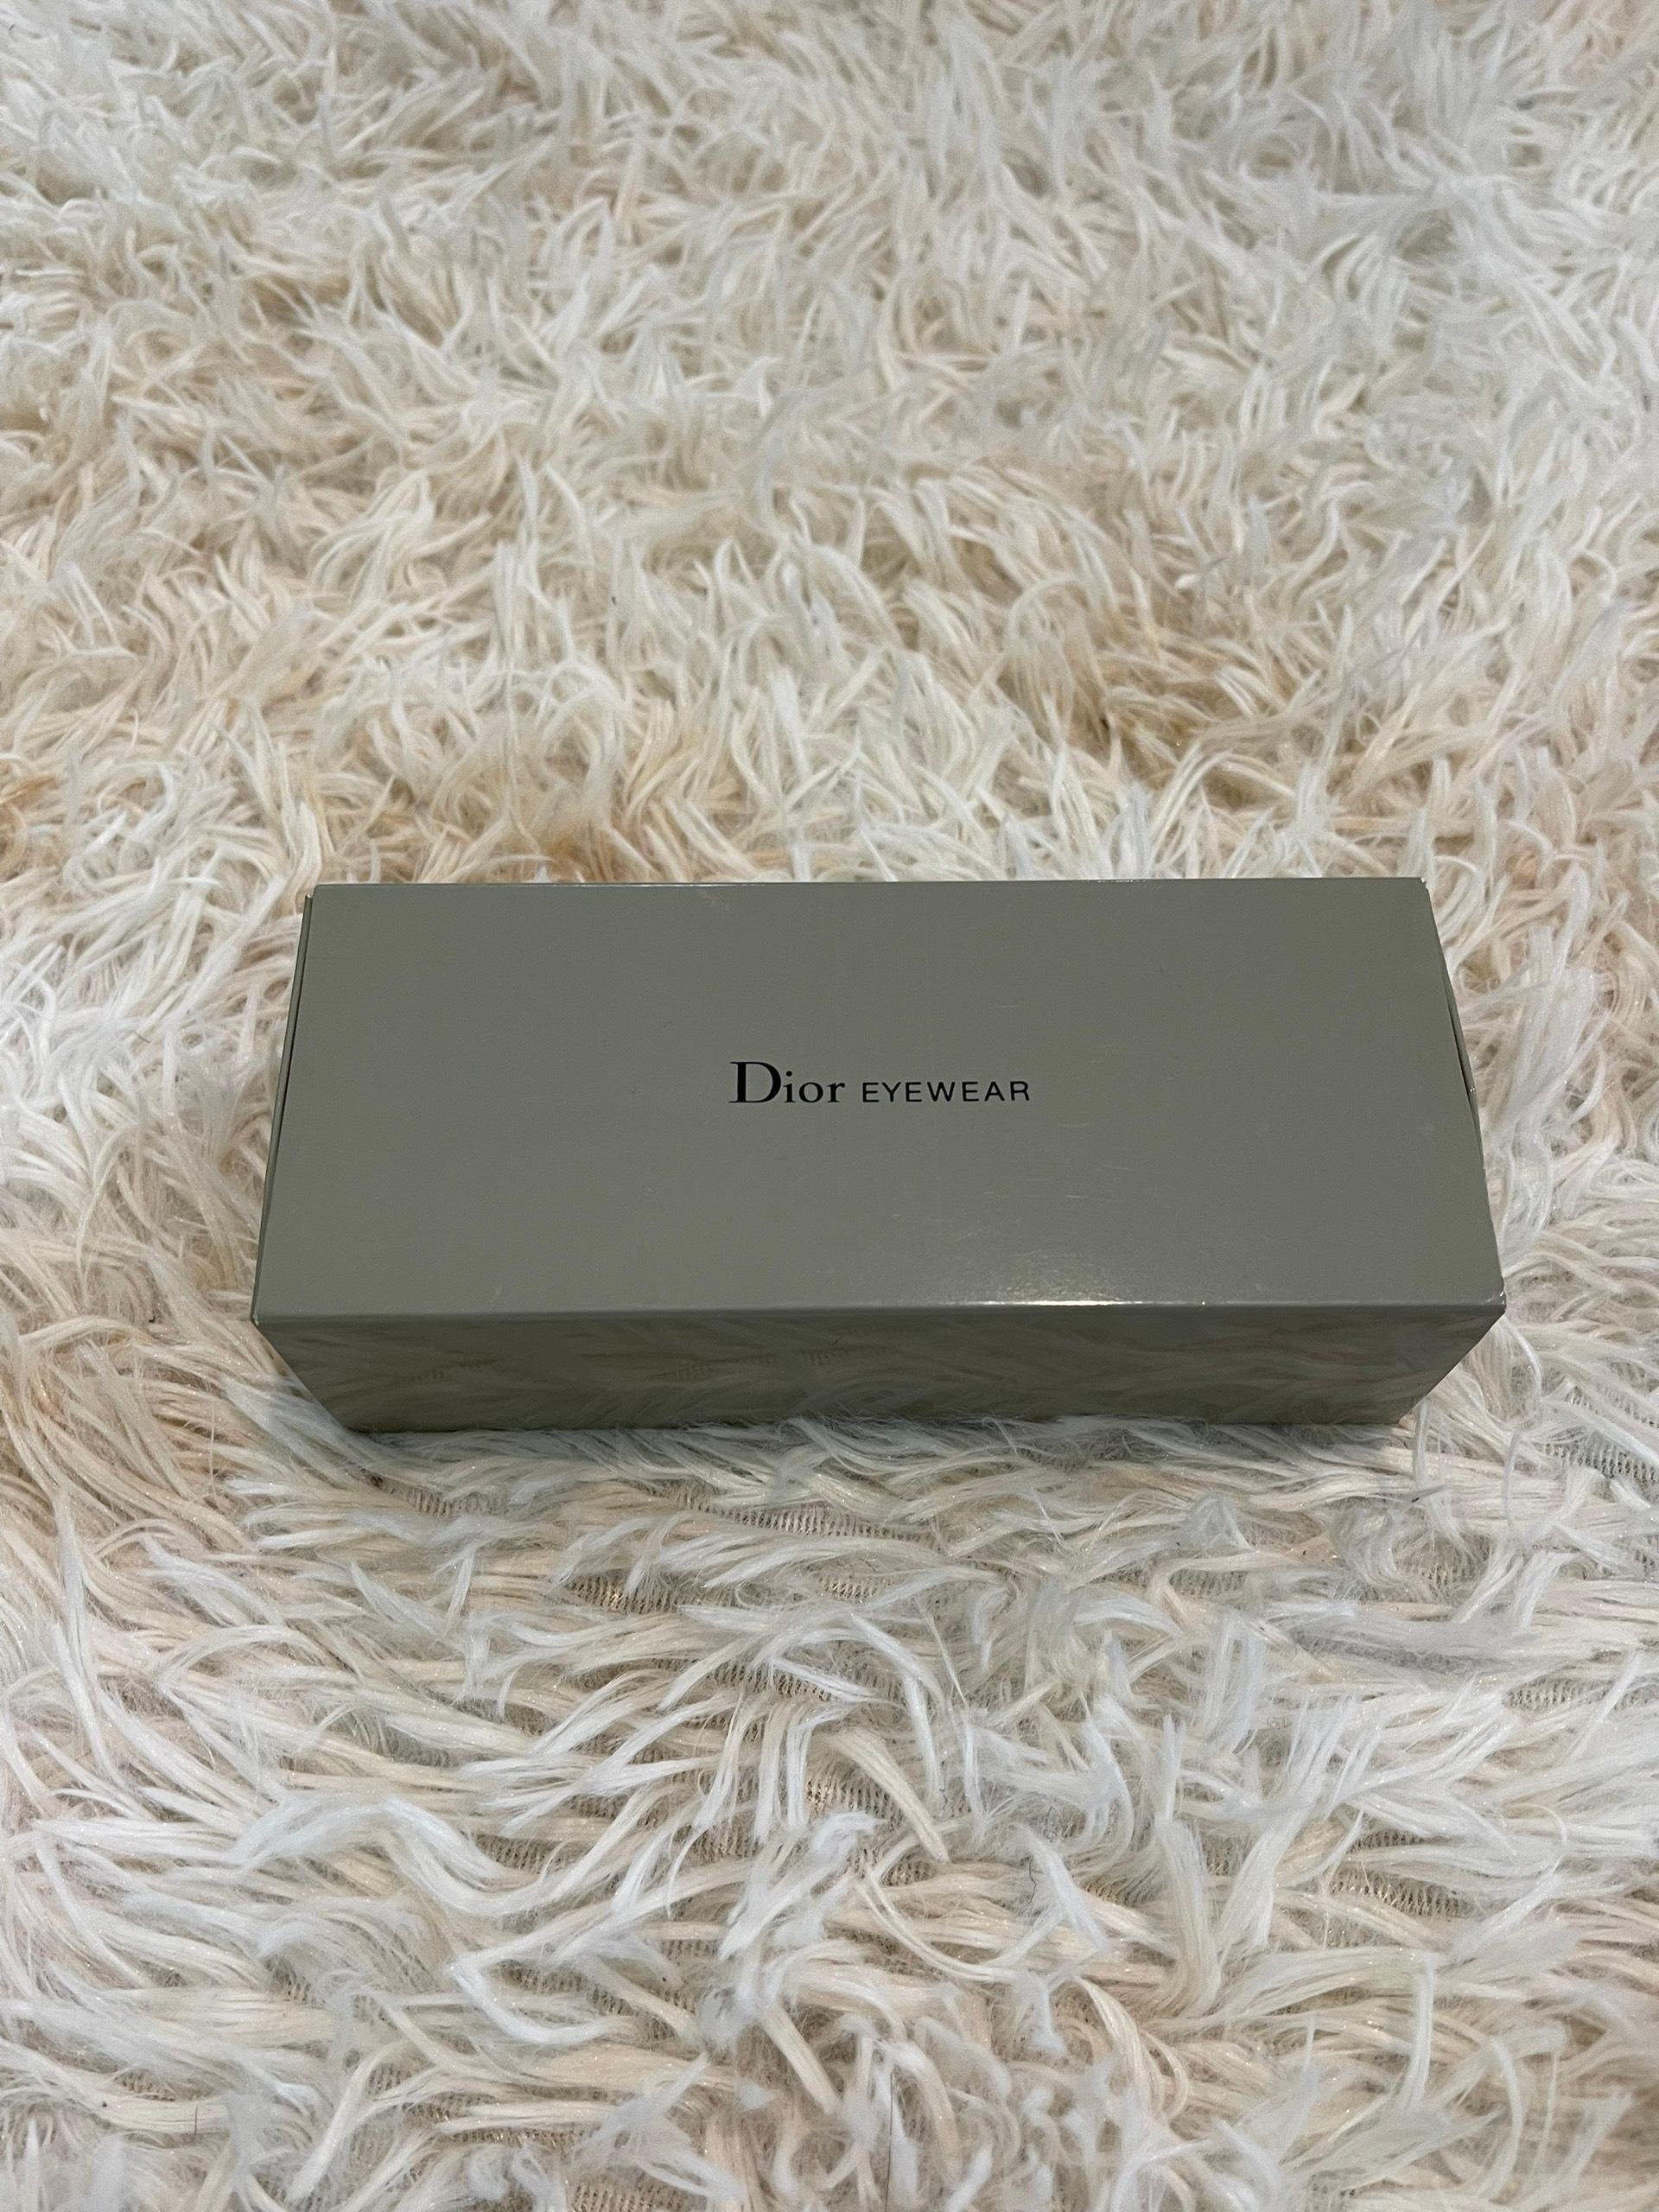 Aviator Sunglasses from Dior HOMME

Silhouette: Unisex aviator sunglasses, 

Fabric: Metal and Plastic

Weight: 500g

Color: Black

Defects: Pressed box, overall there are no significant defects, one side of the rim has slight usage feel